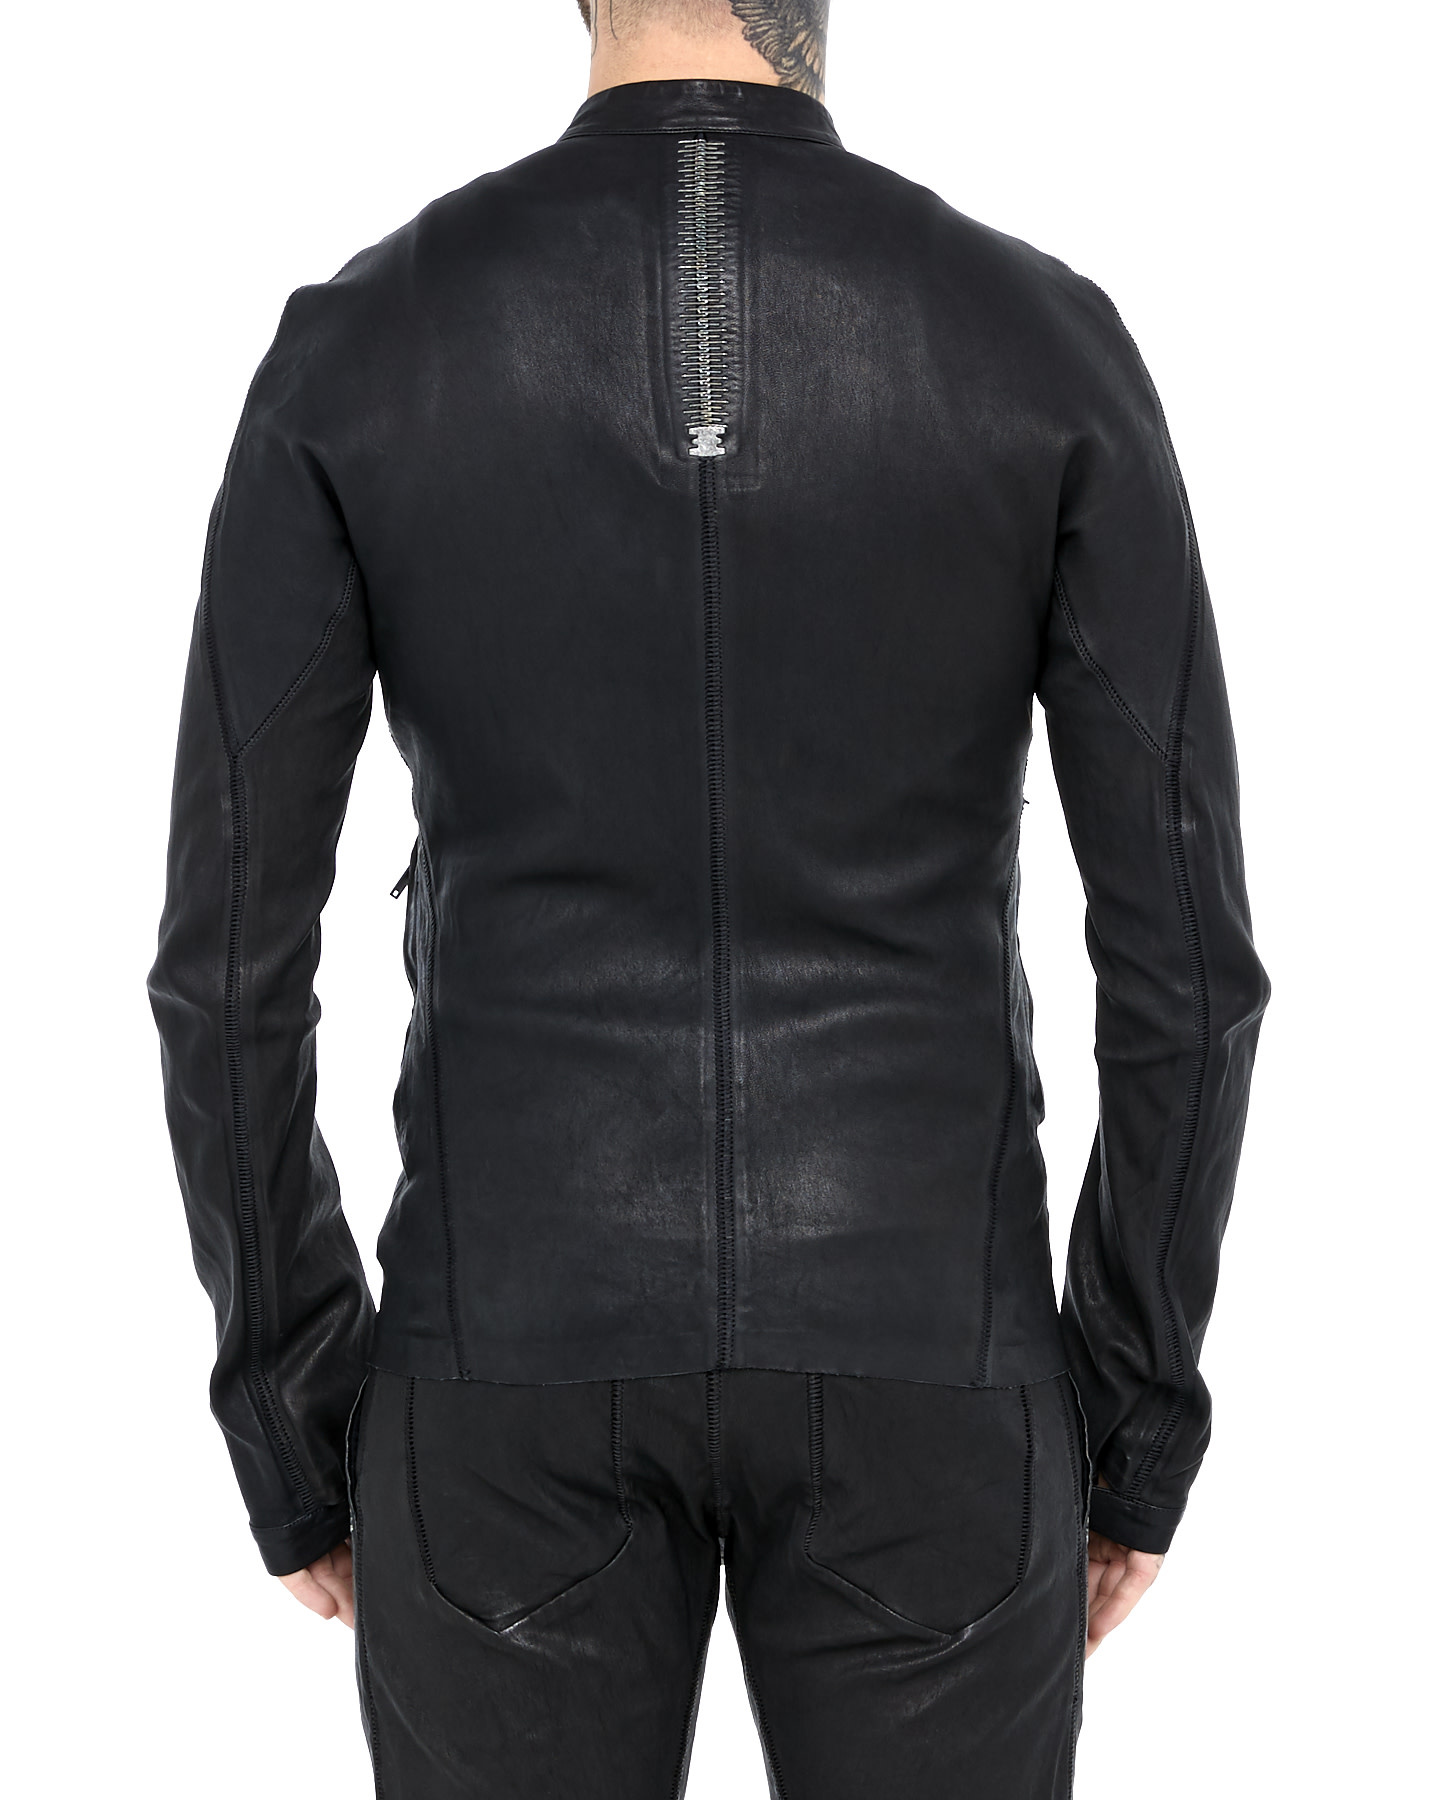 Bute Neo Stretch Leather Jacket Sellam Untitled NYC Isaac NYC - | Untitled Shop Shop by